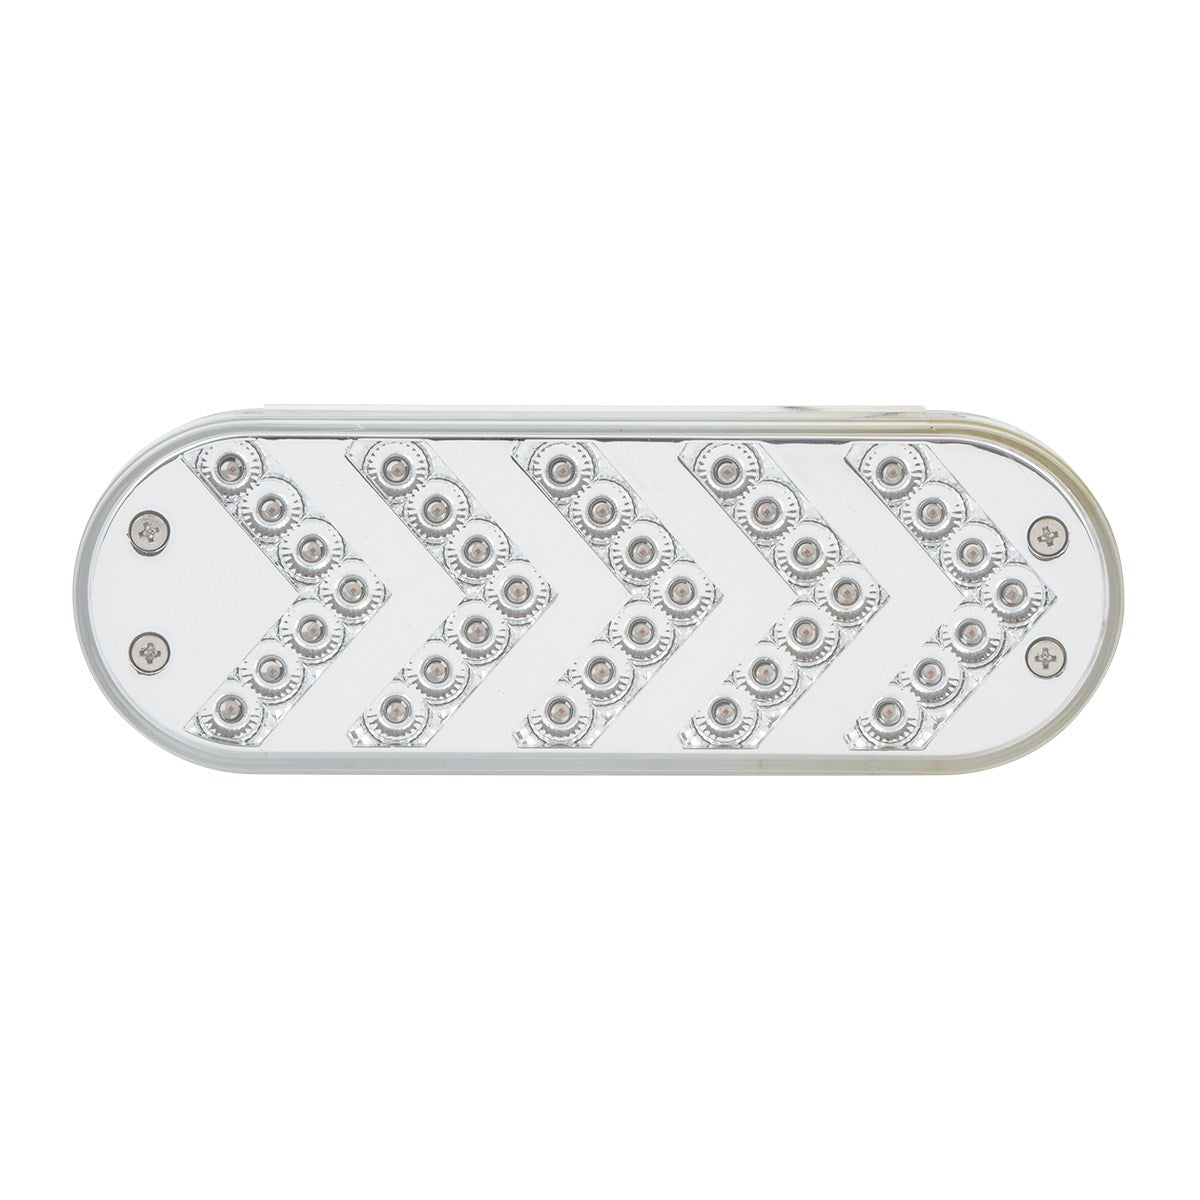 OVAL SEQUENTIAL ARROW MID-TURN SPYDER LED LIGHT